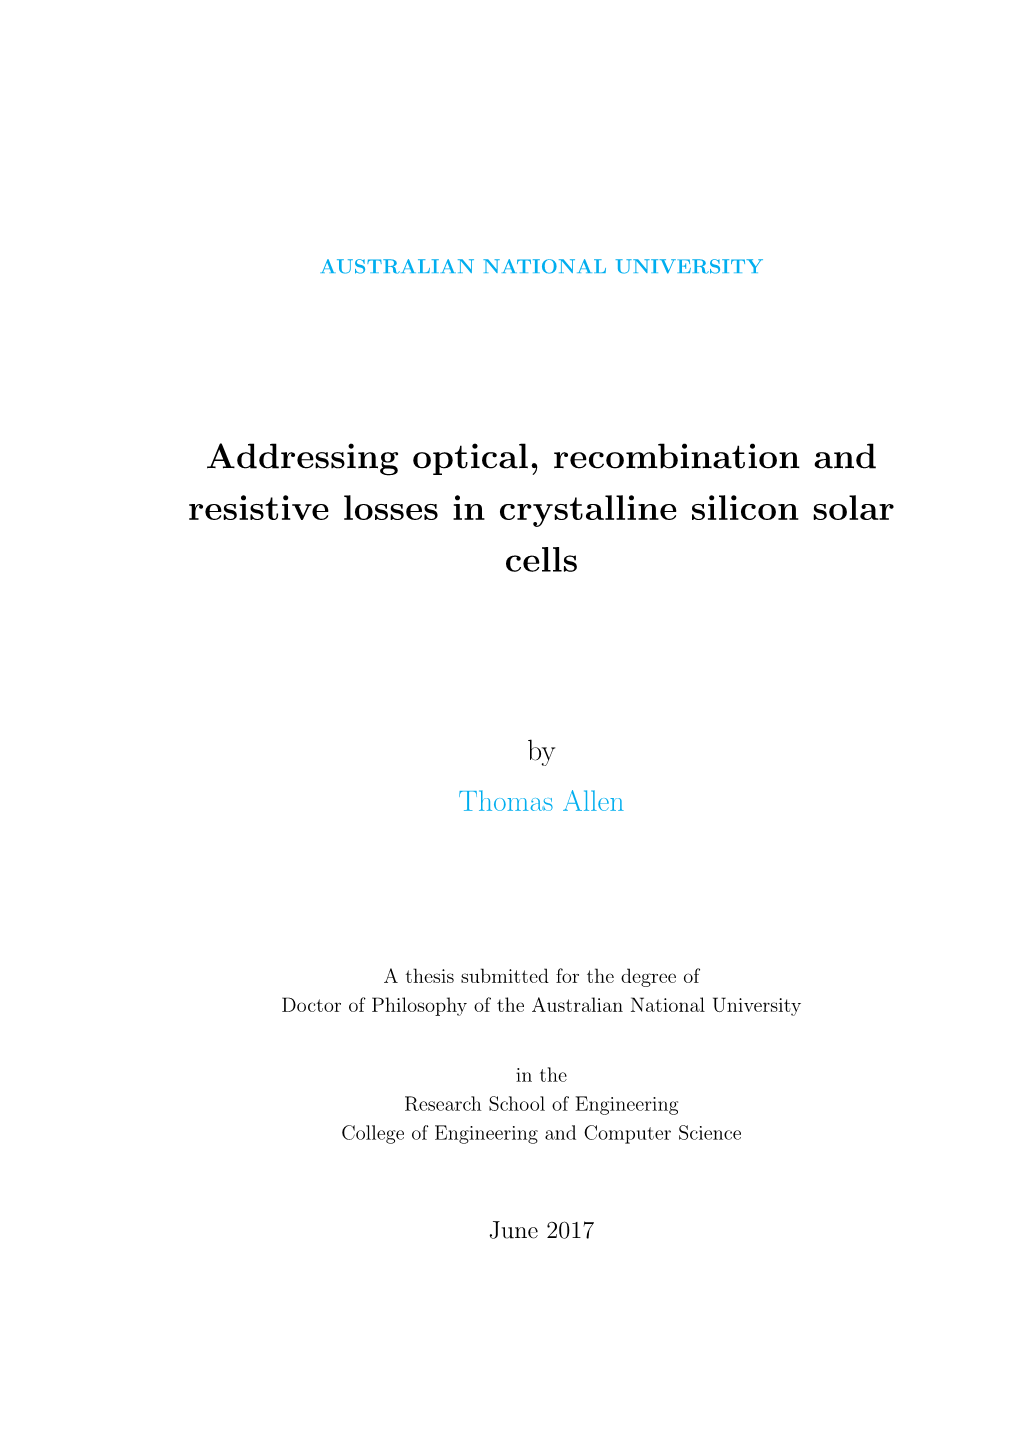 Addressing Optical, Recombination and Resistive Losses in Crystalline Silicon Solar Cells